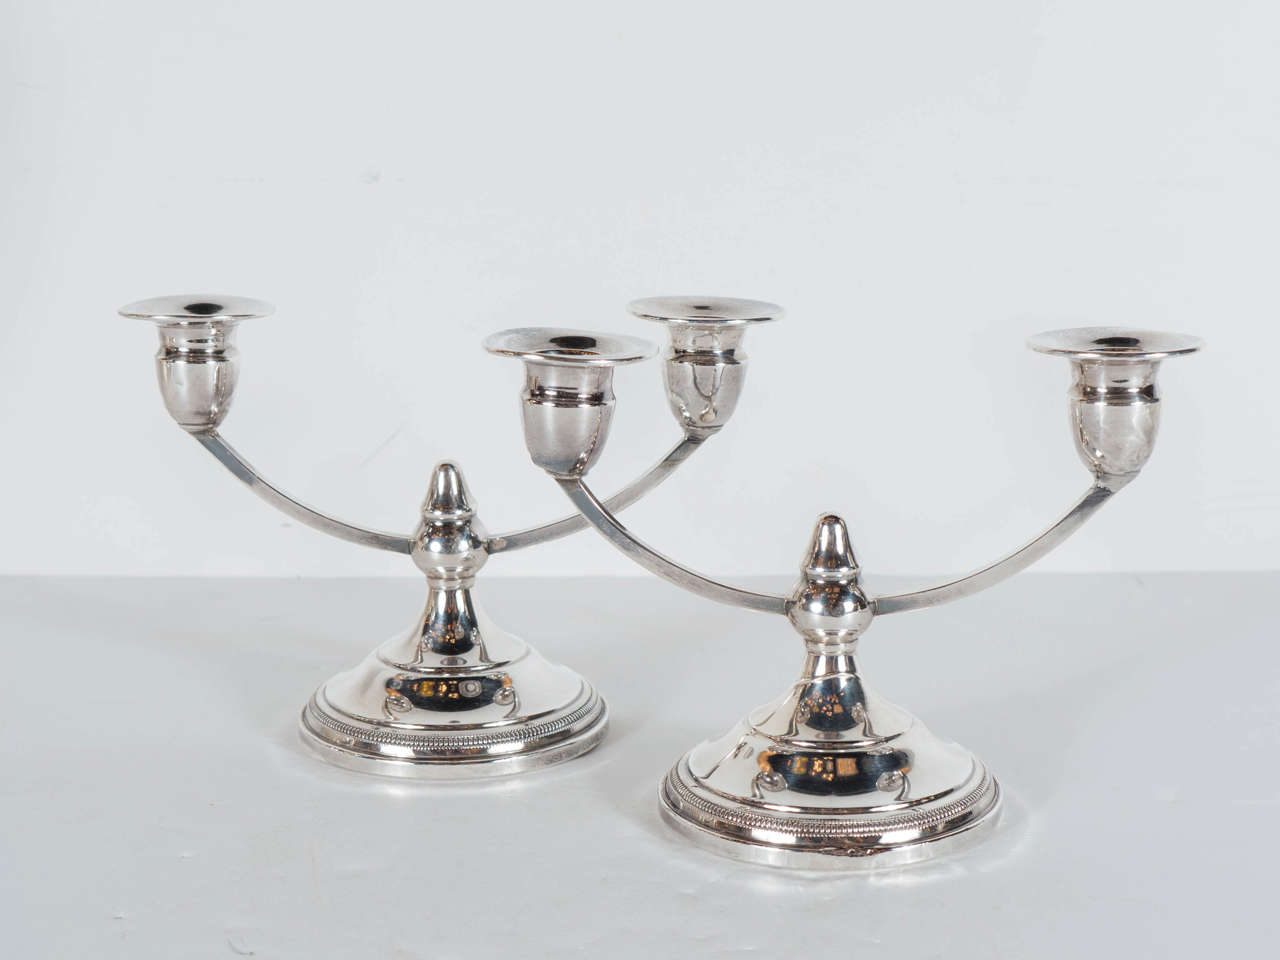 This stunning set of 2 Art Deco sterling silver weighted candle stands features a 